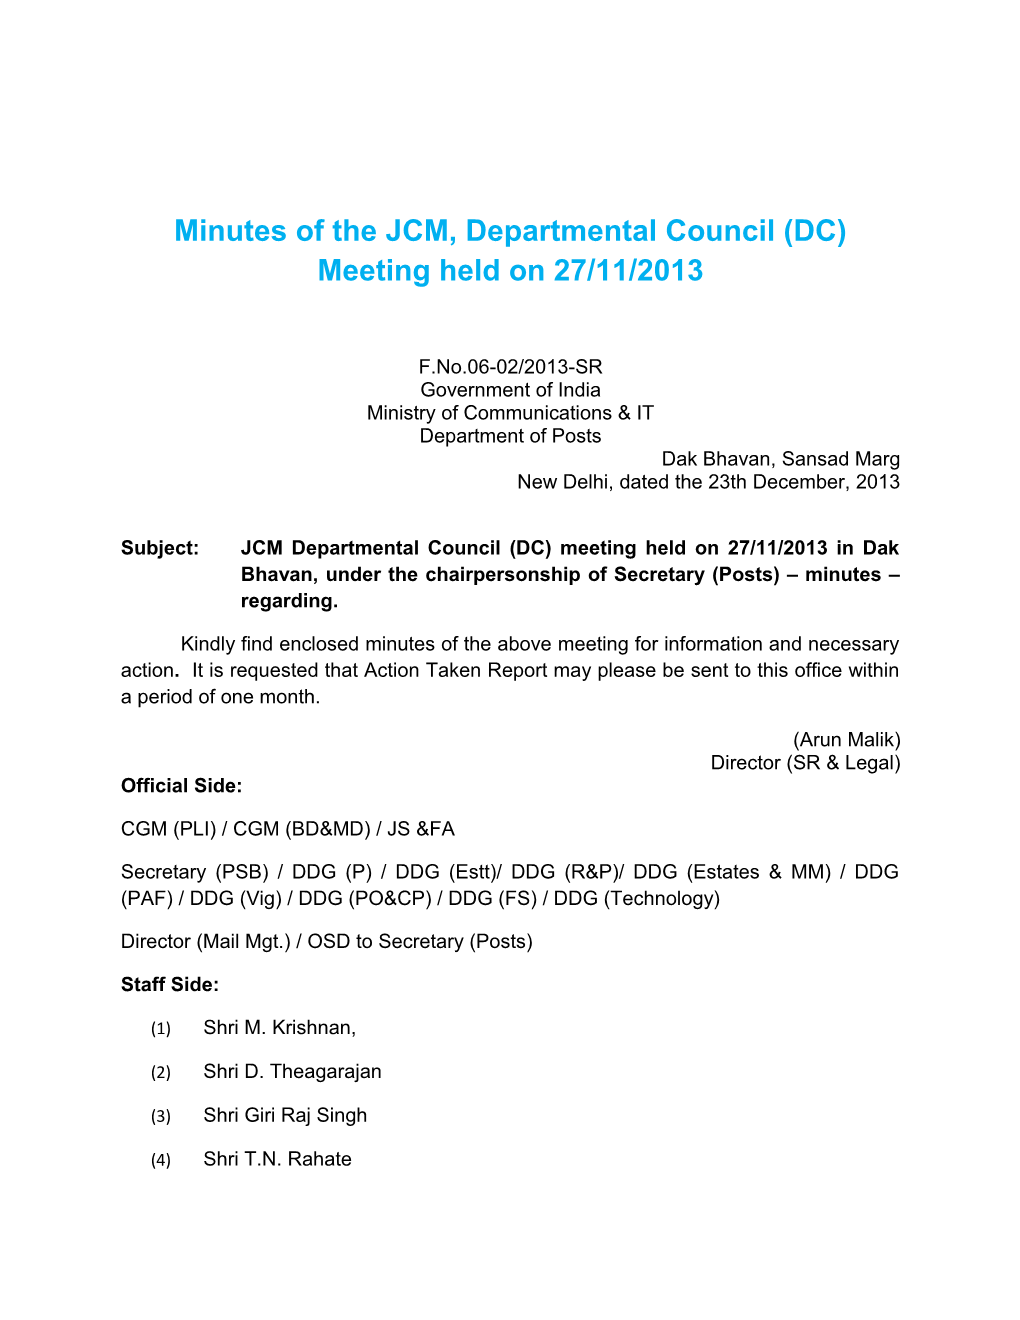 Minutes of the JCM, Departmental Council (DC) Meeting Held on 27/11/2013